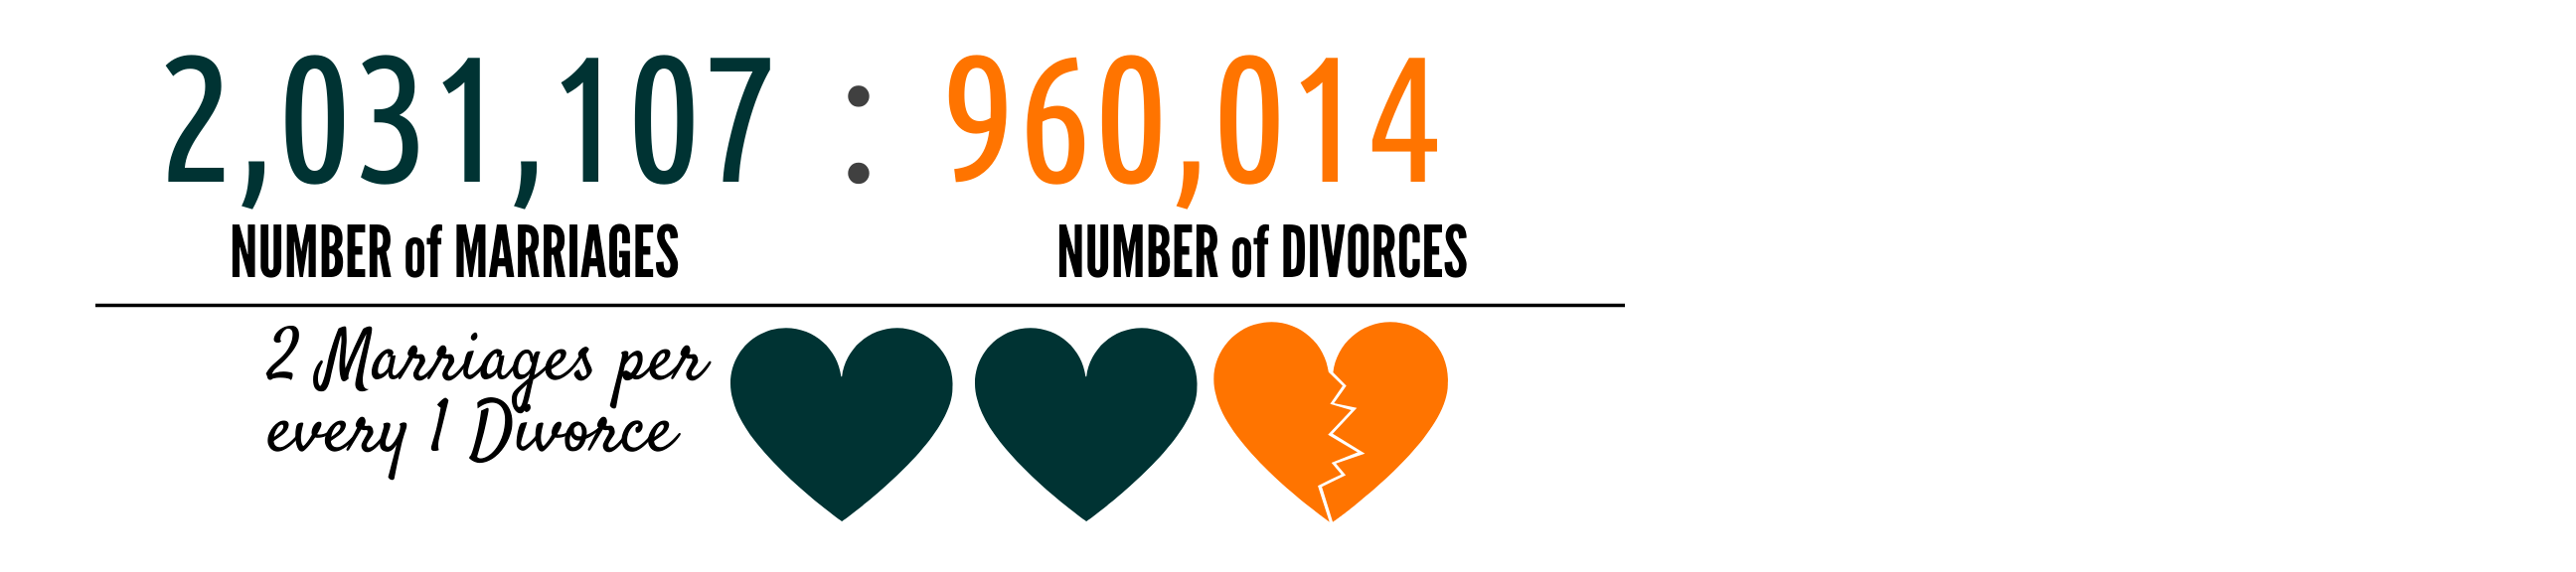 graphic showing number of marriages and number of divorces